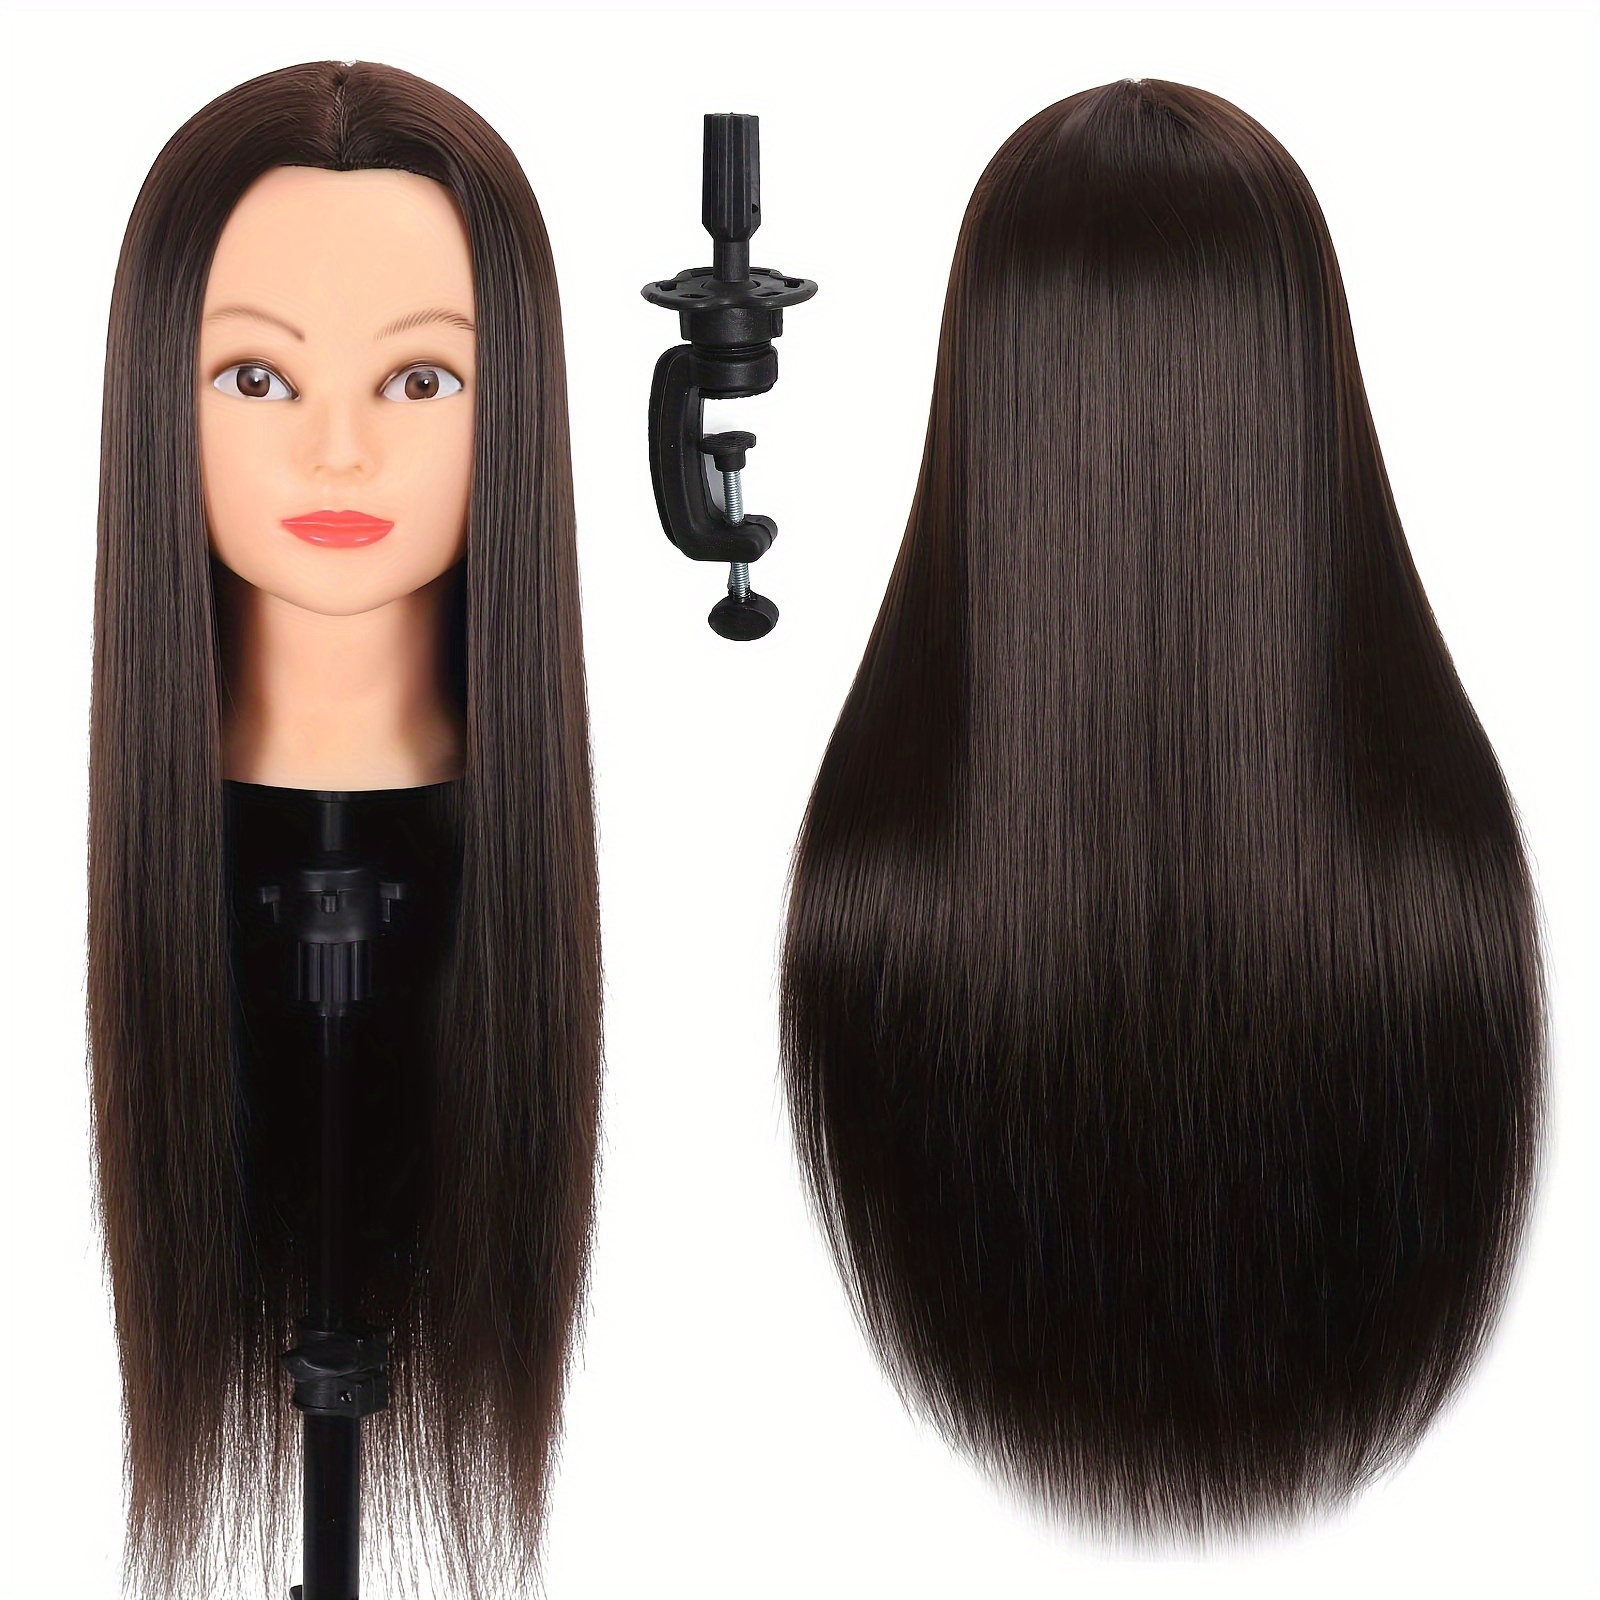 

Mannequin Head With Hair Training Head With Free Clamp Stand Manikin Cosmetology Hairdressing Doll Head For Braiding Cutting Styling